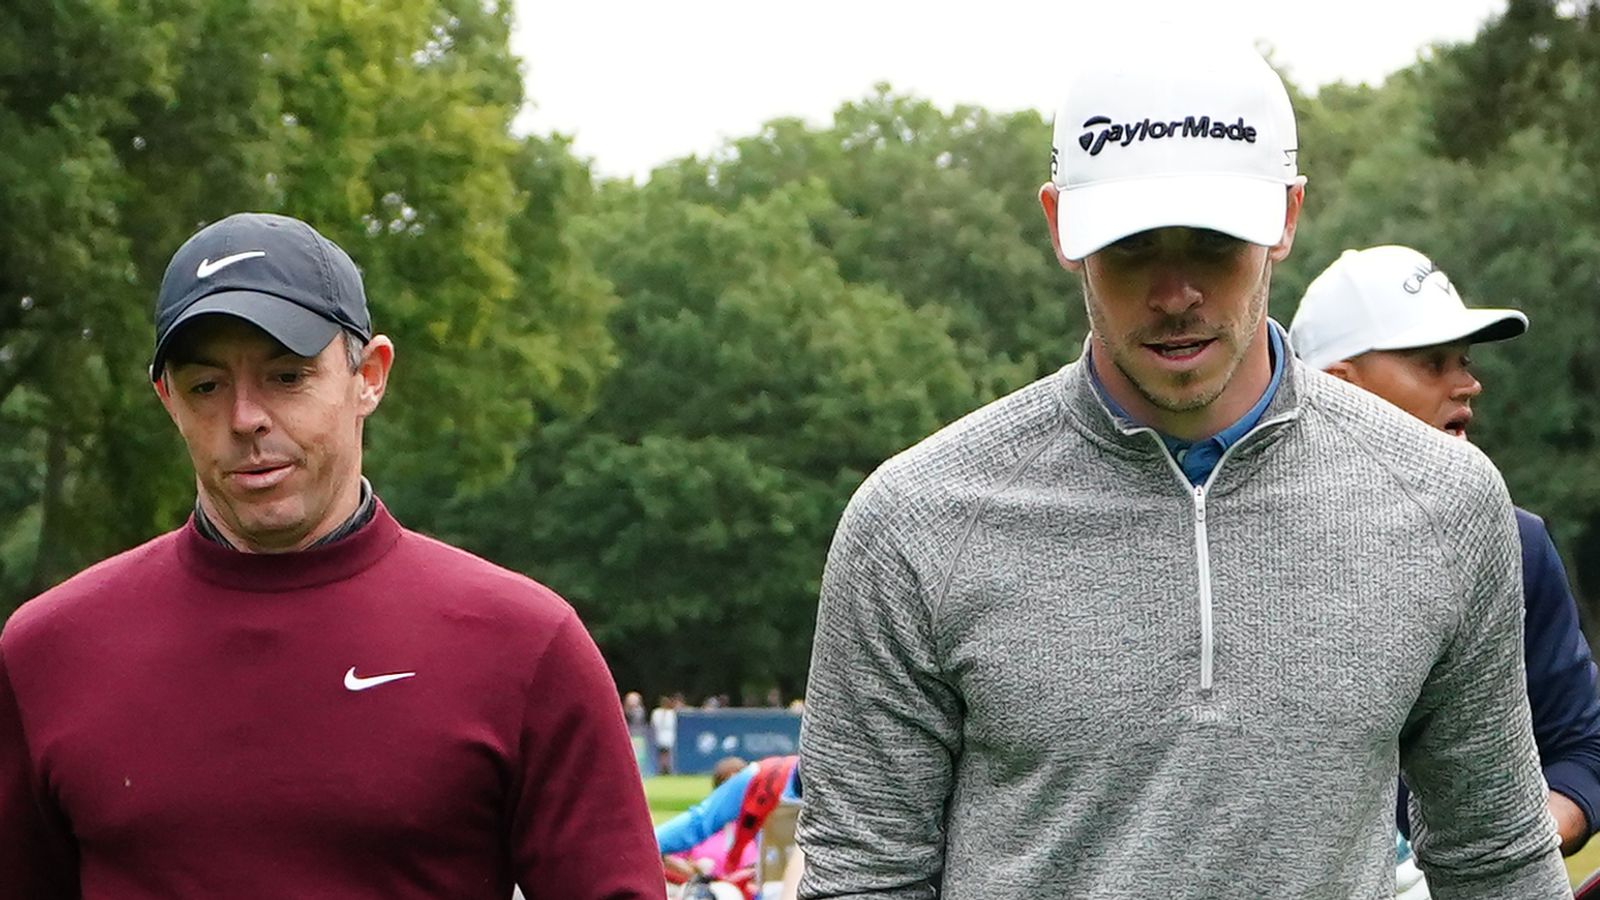 BMW PGA Championship notebook: Ryder Cup chat, Gareth Bale, Spider-Man and more at Wentworth